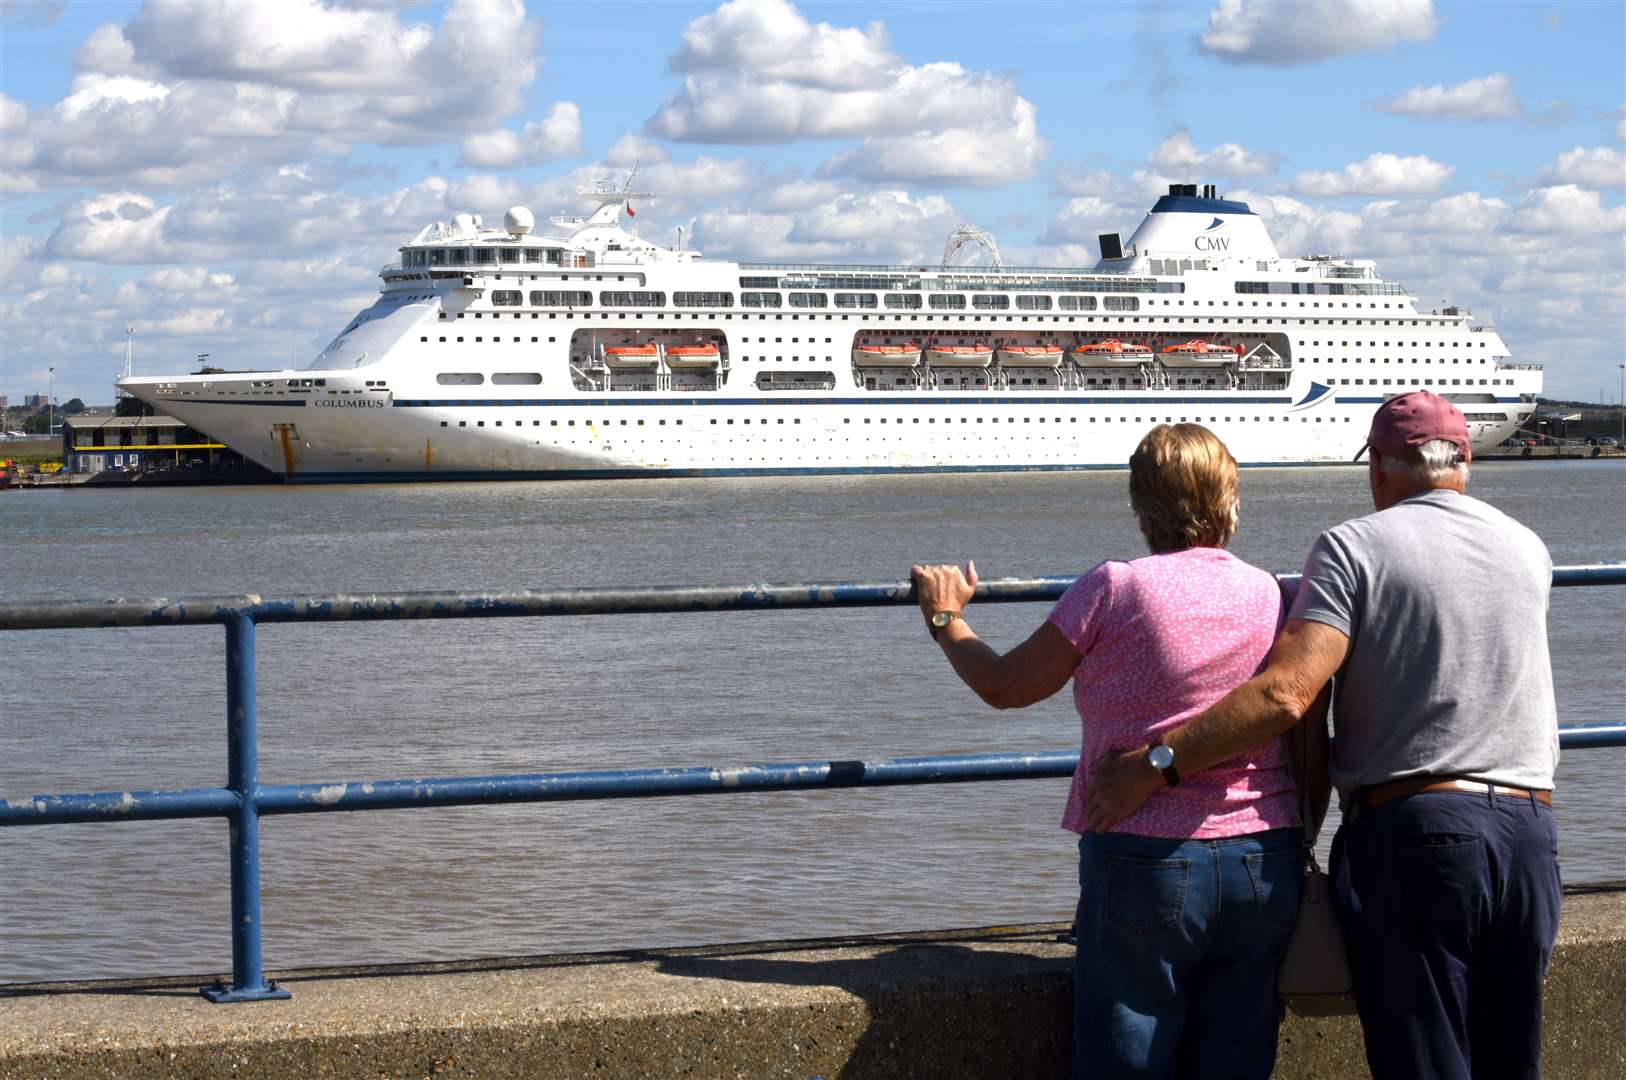 CMV cruise line, which can often be seen from Gravesend, has gone into administration. Picture: Fraser Gray (38983063)